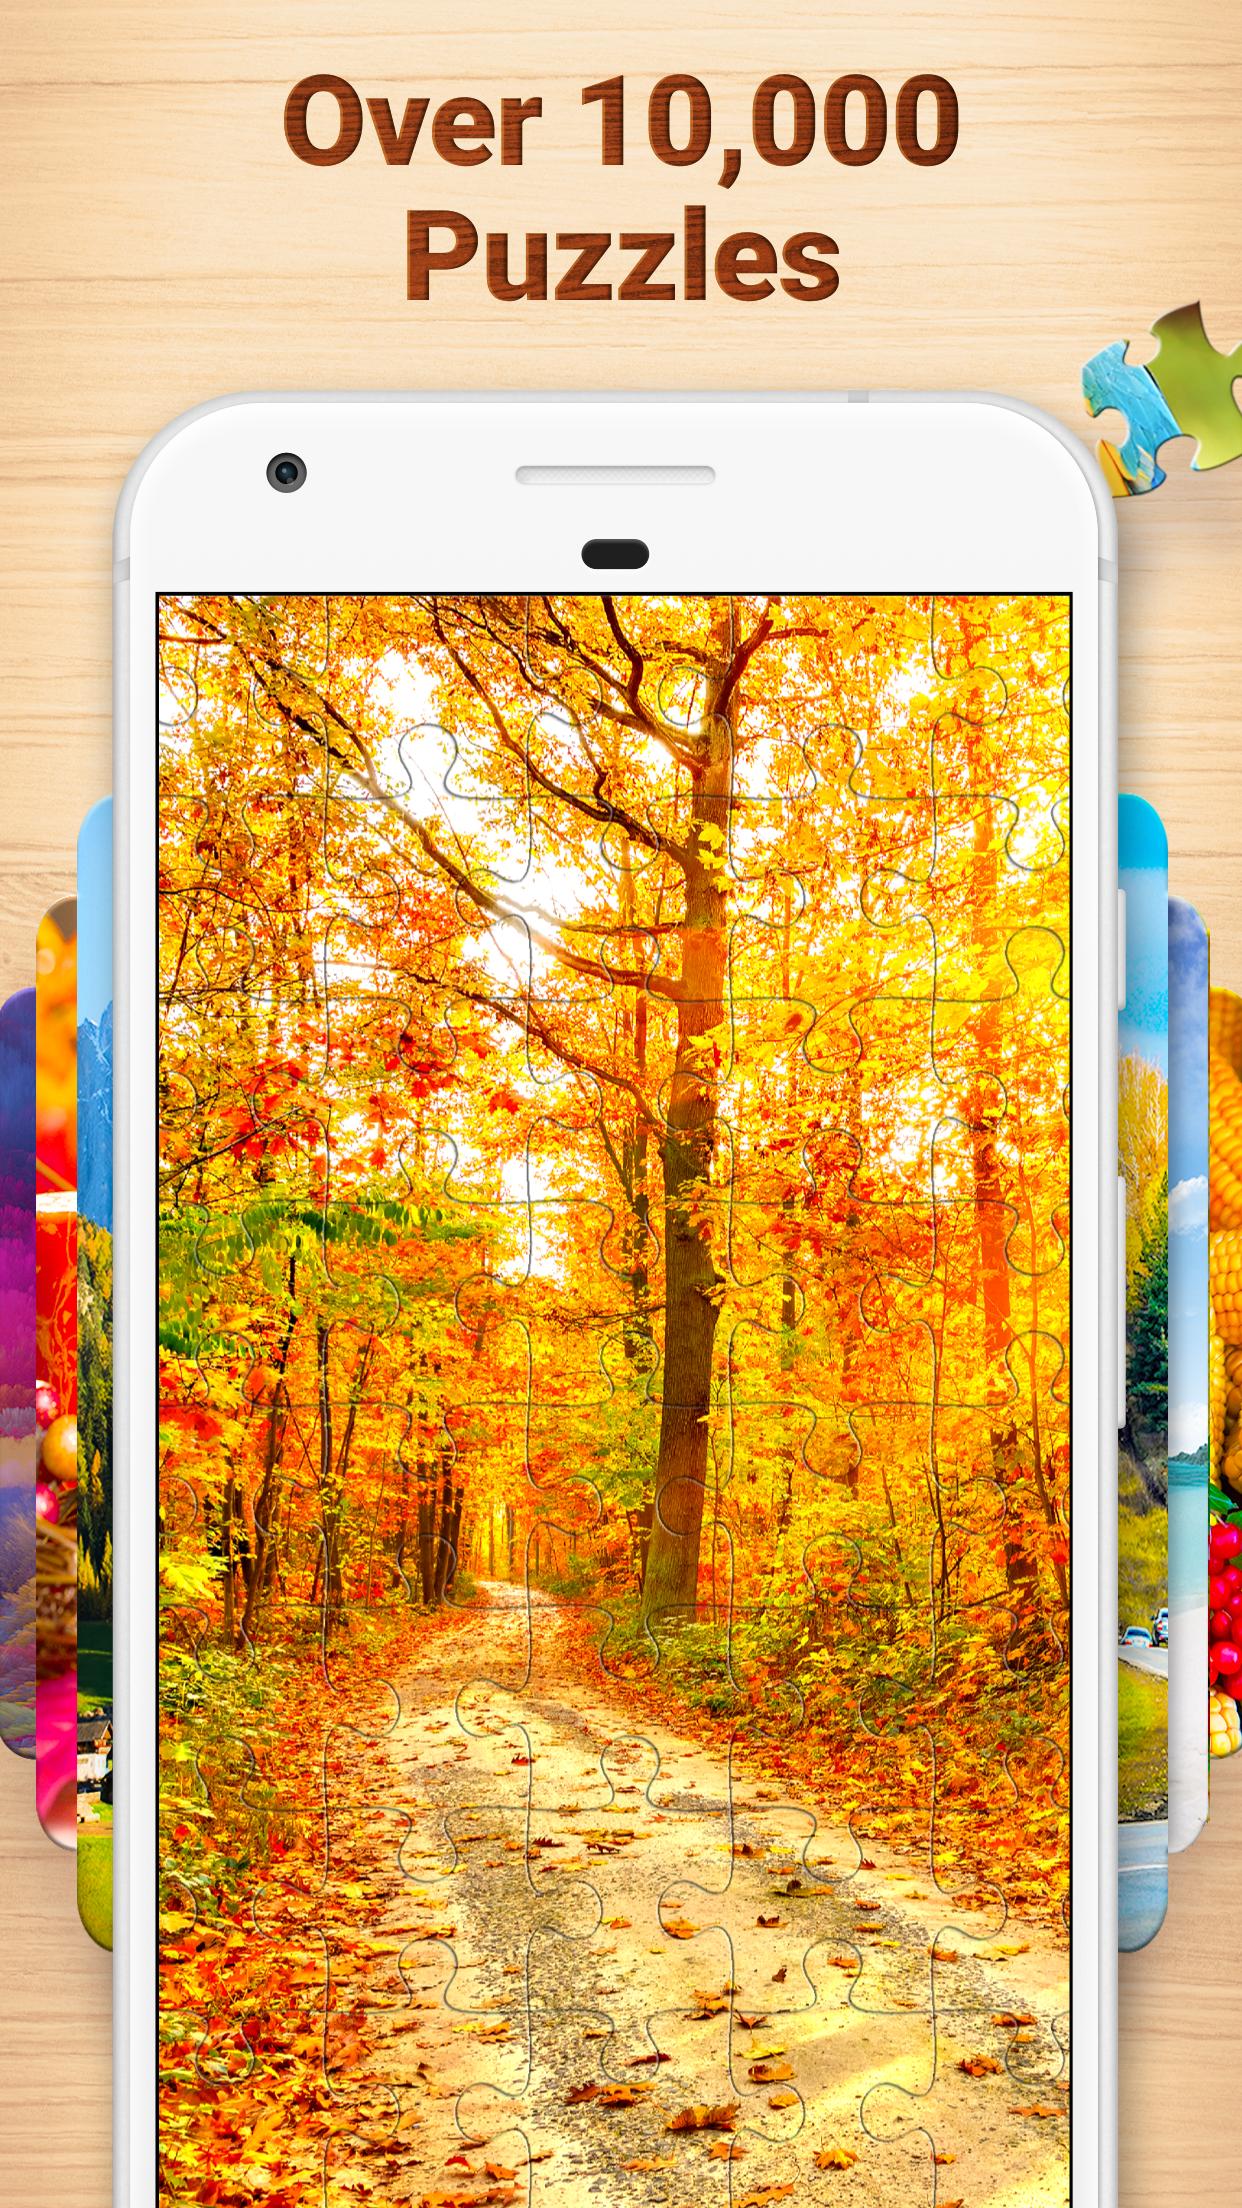 Jigsaw Puzzles Puzzle Game 2.2.3 Screenshot 2